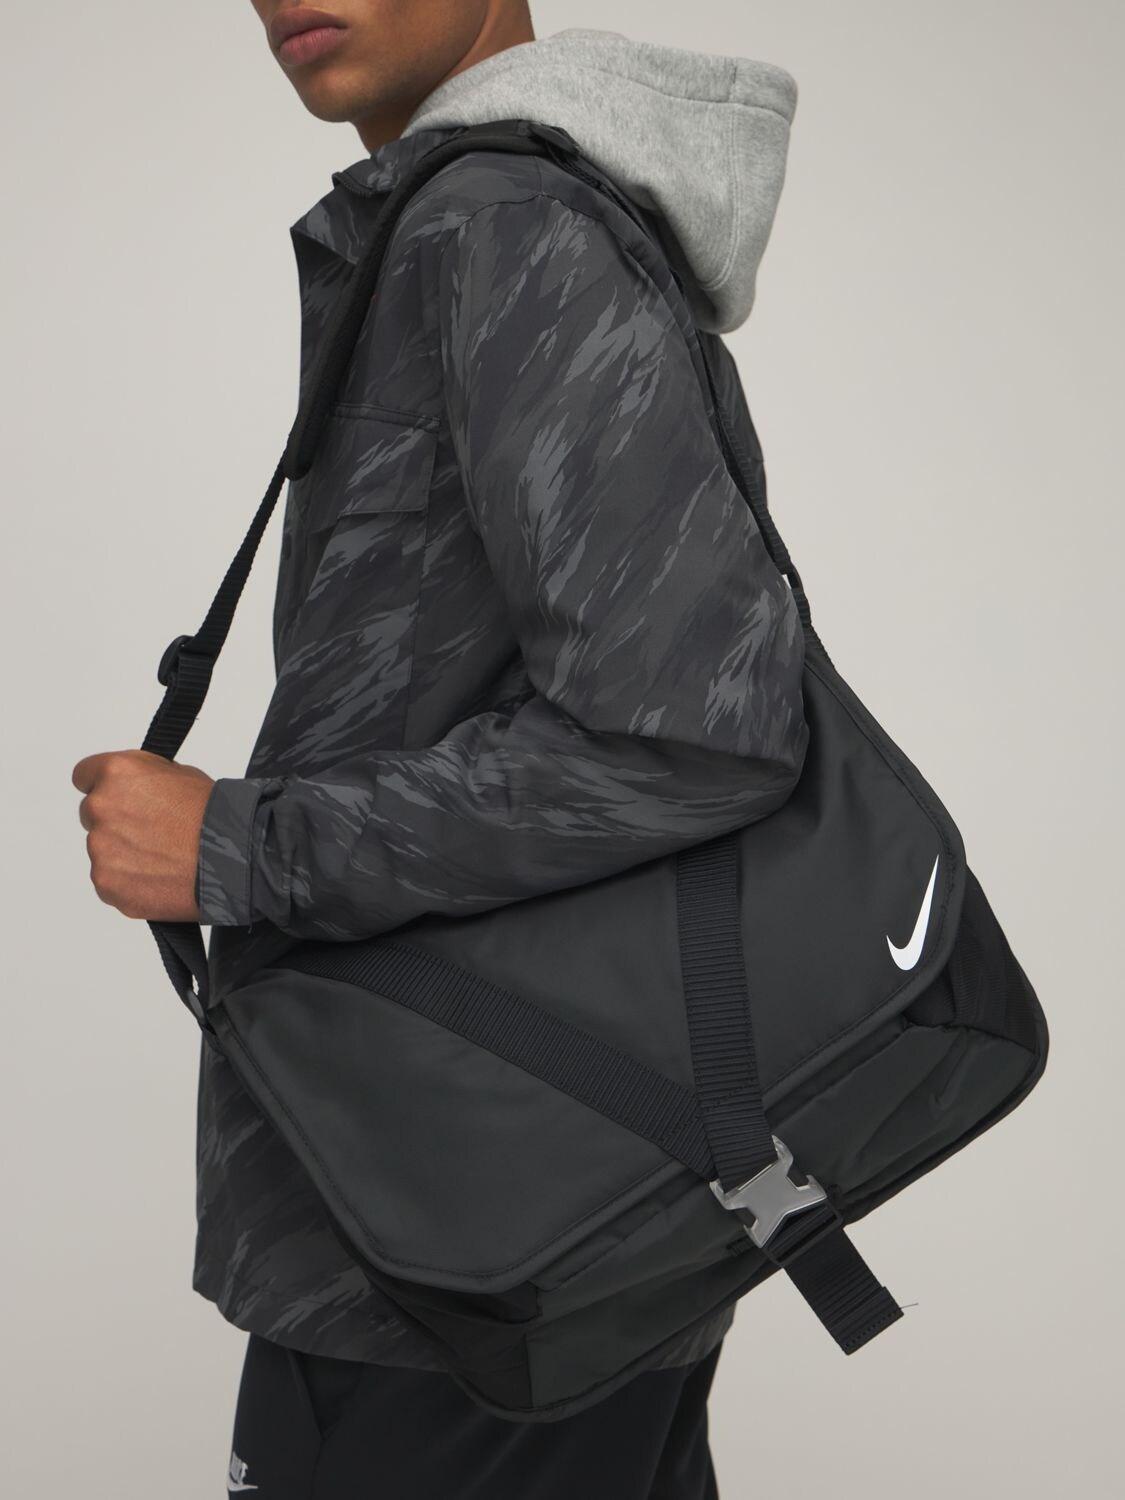 Buy Black Fashion Bags for Men by NIKE Online